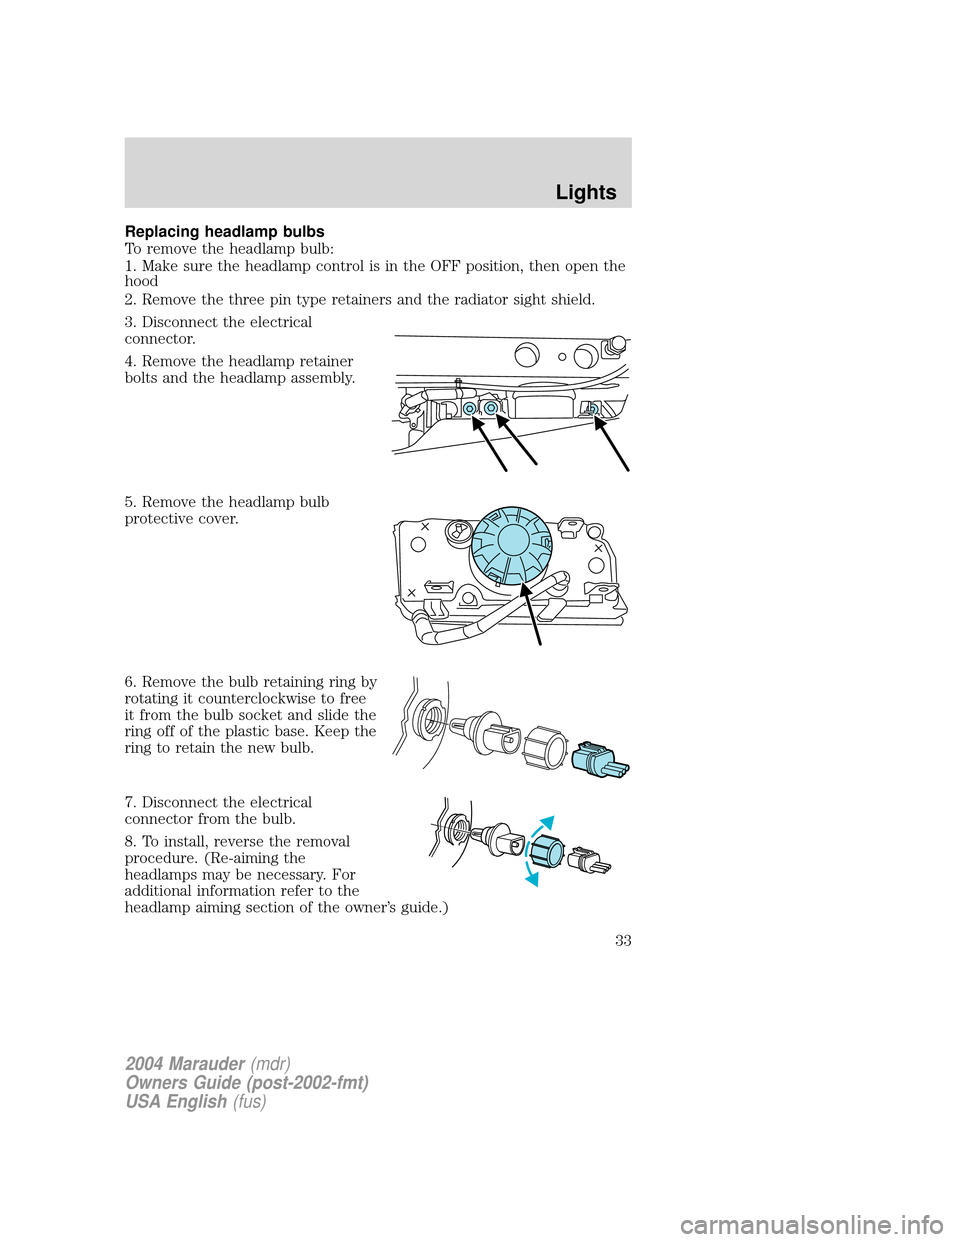 Mercury Marauder 2004  Owners Manuals Replacing headlamp bulbs
To remove the headlamp bulb:
1. Make sure the headlamp control is in the OFF position, then open the
hood
2. Remove the three pin type retainers and the radiator sight shield.